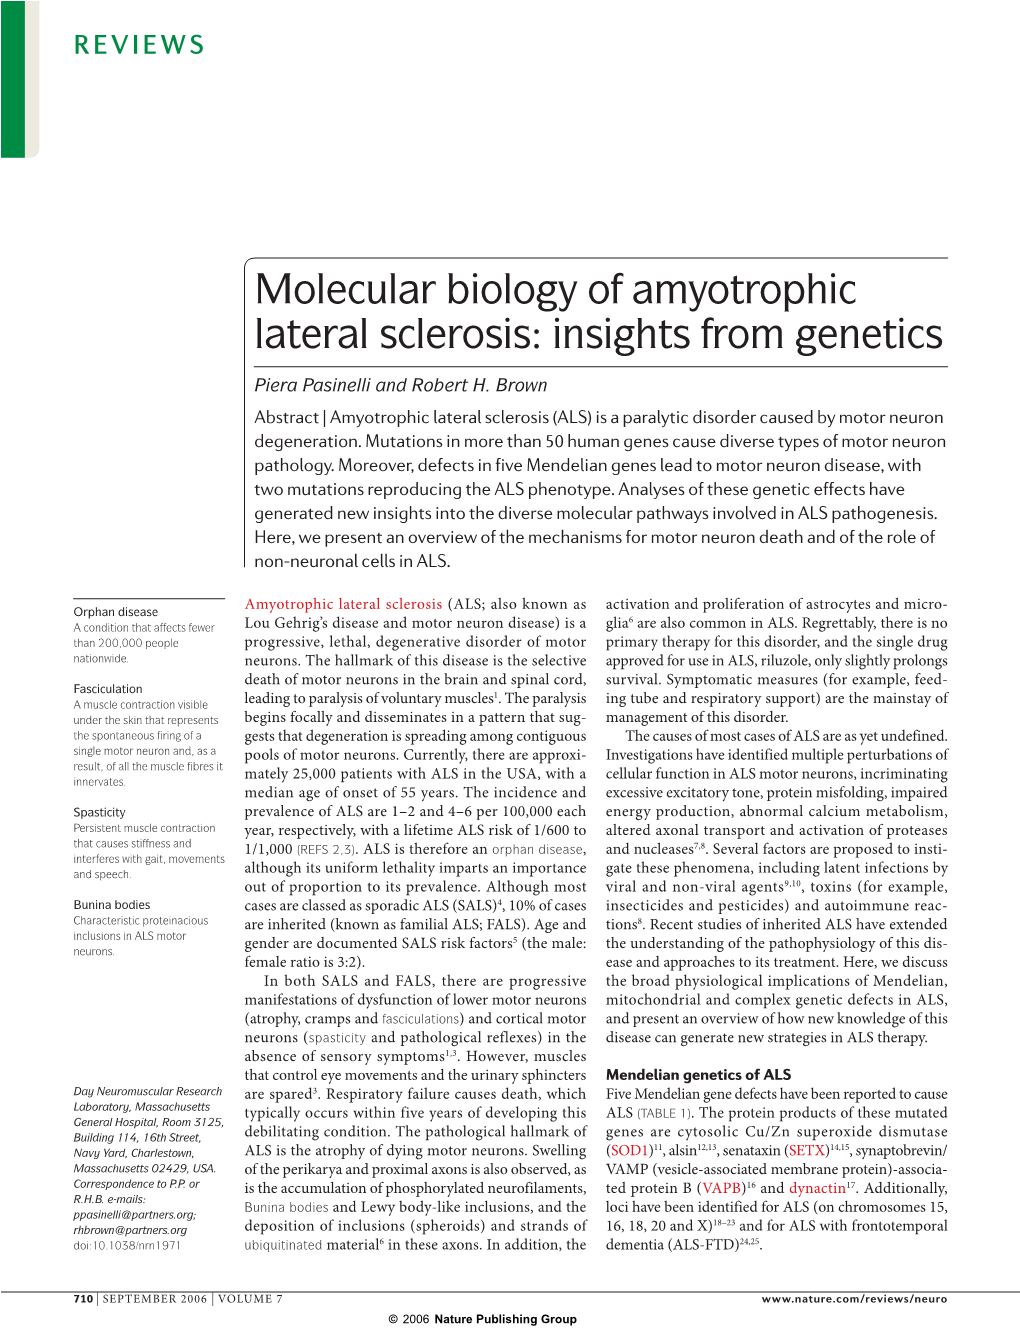 Molecular Biology of Amyotrophic Lateral Sclerosis: Insights from Genetics